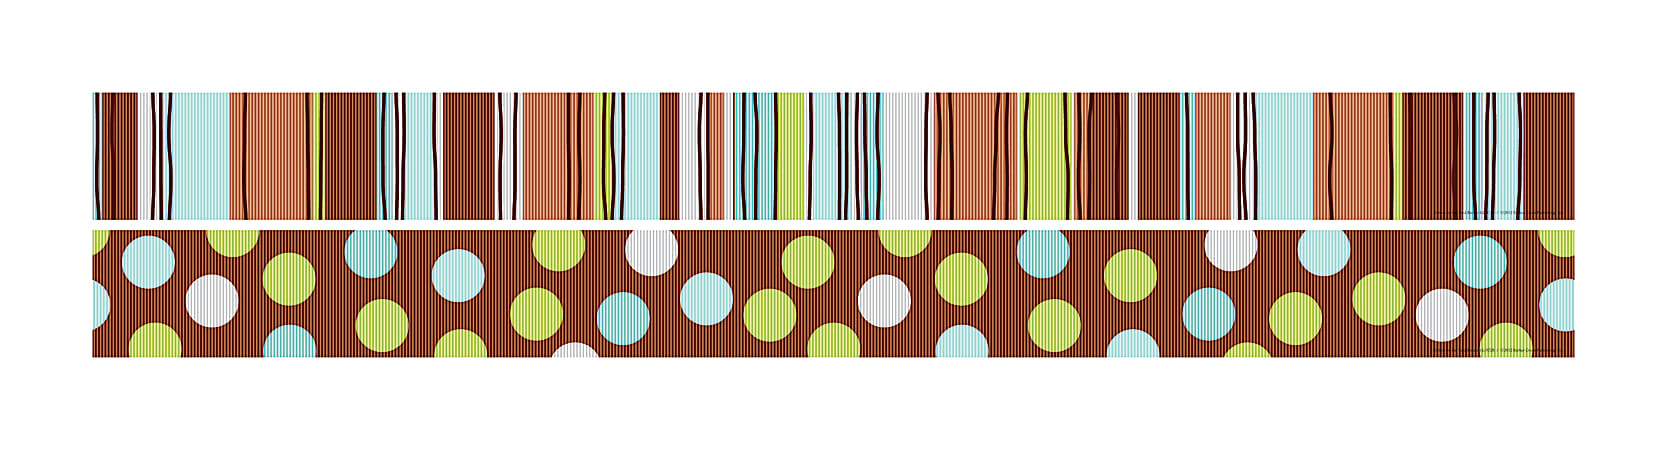 Barker Creek Double-Sided Straight-Edge Border Strips, 3" x 35", Ribbon, Pack Of 12